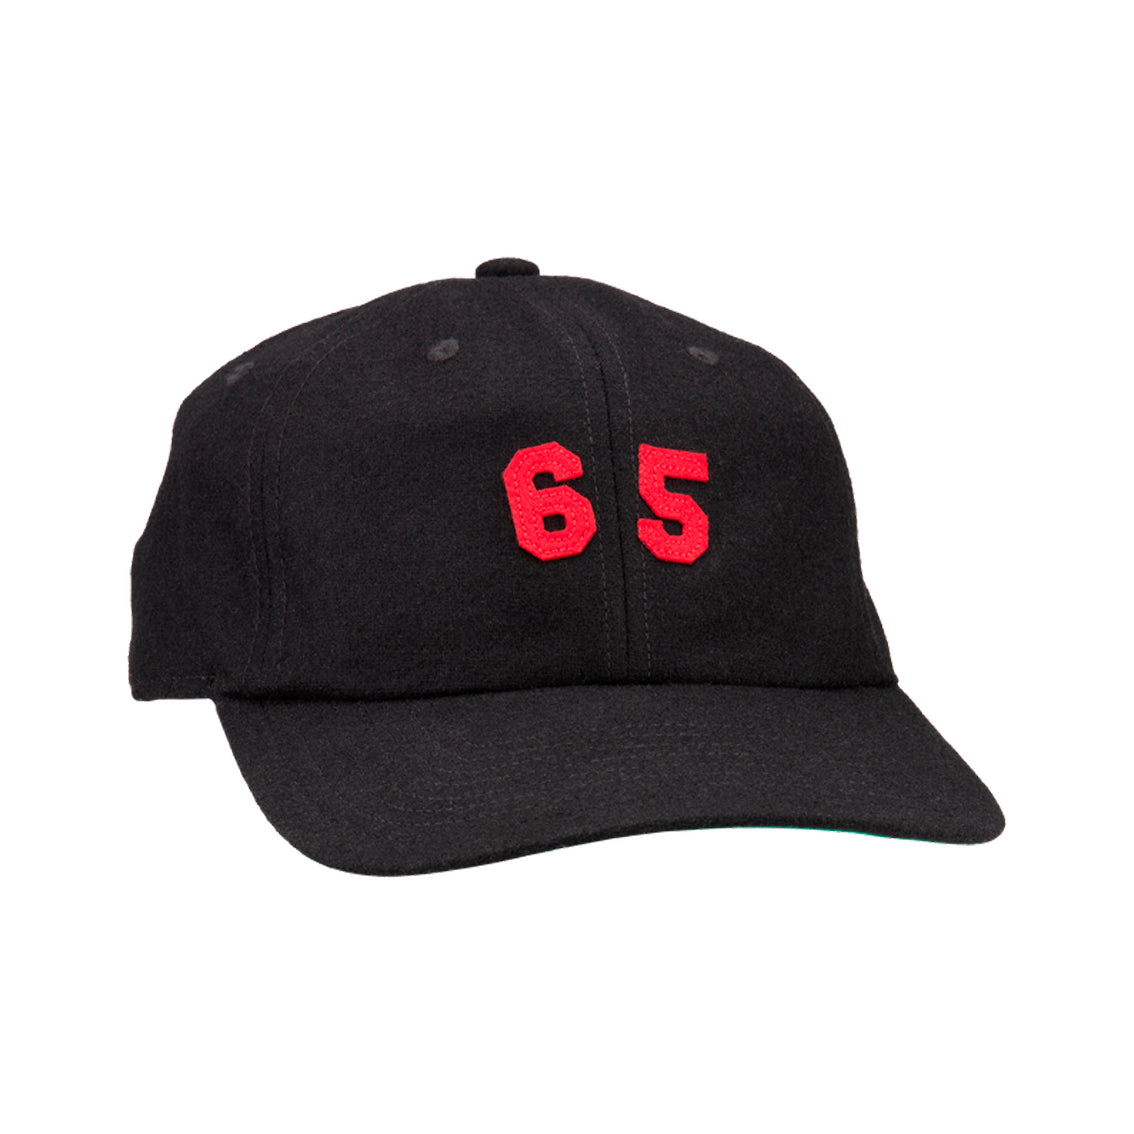 Smith The Taylor Hat Black